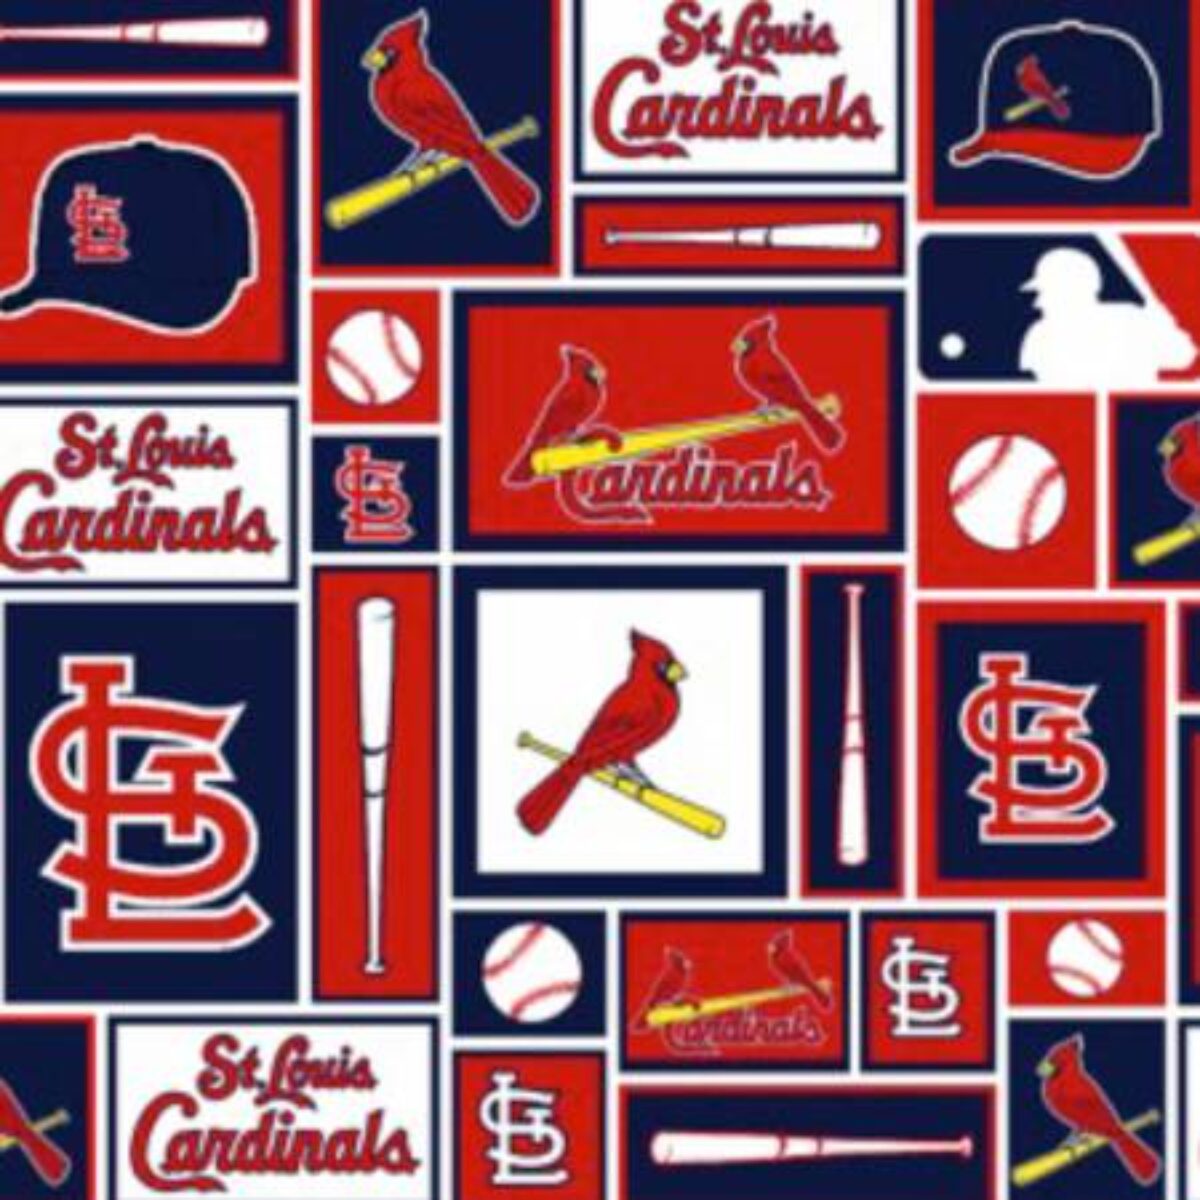 8x12, Baseball Fabric, St. Louis Synthetic Leather, Cardinals